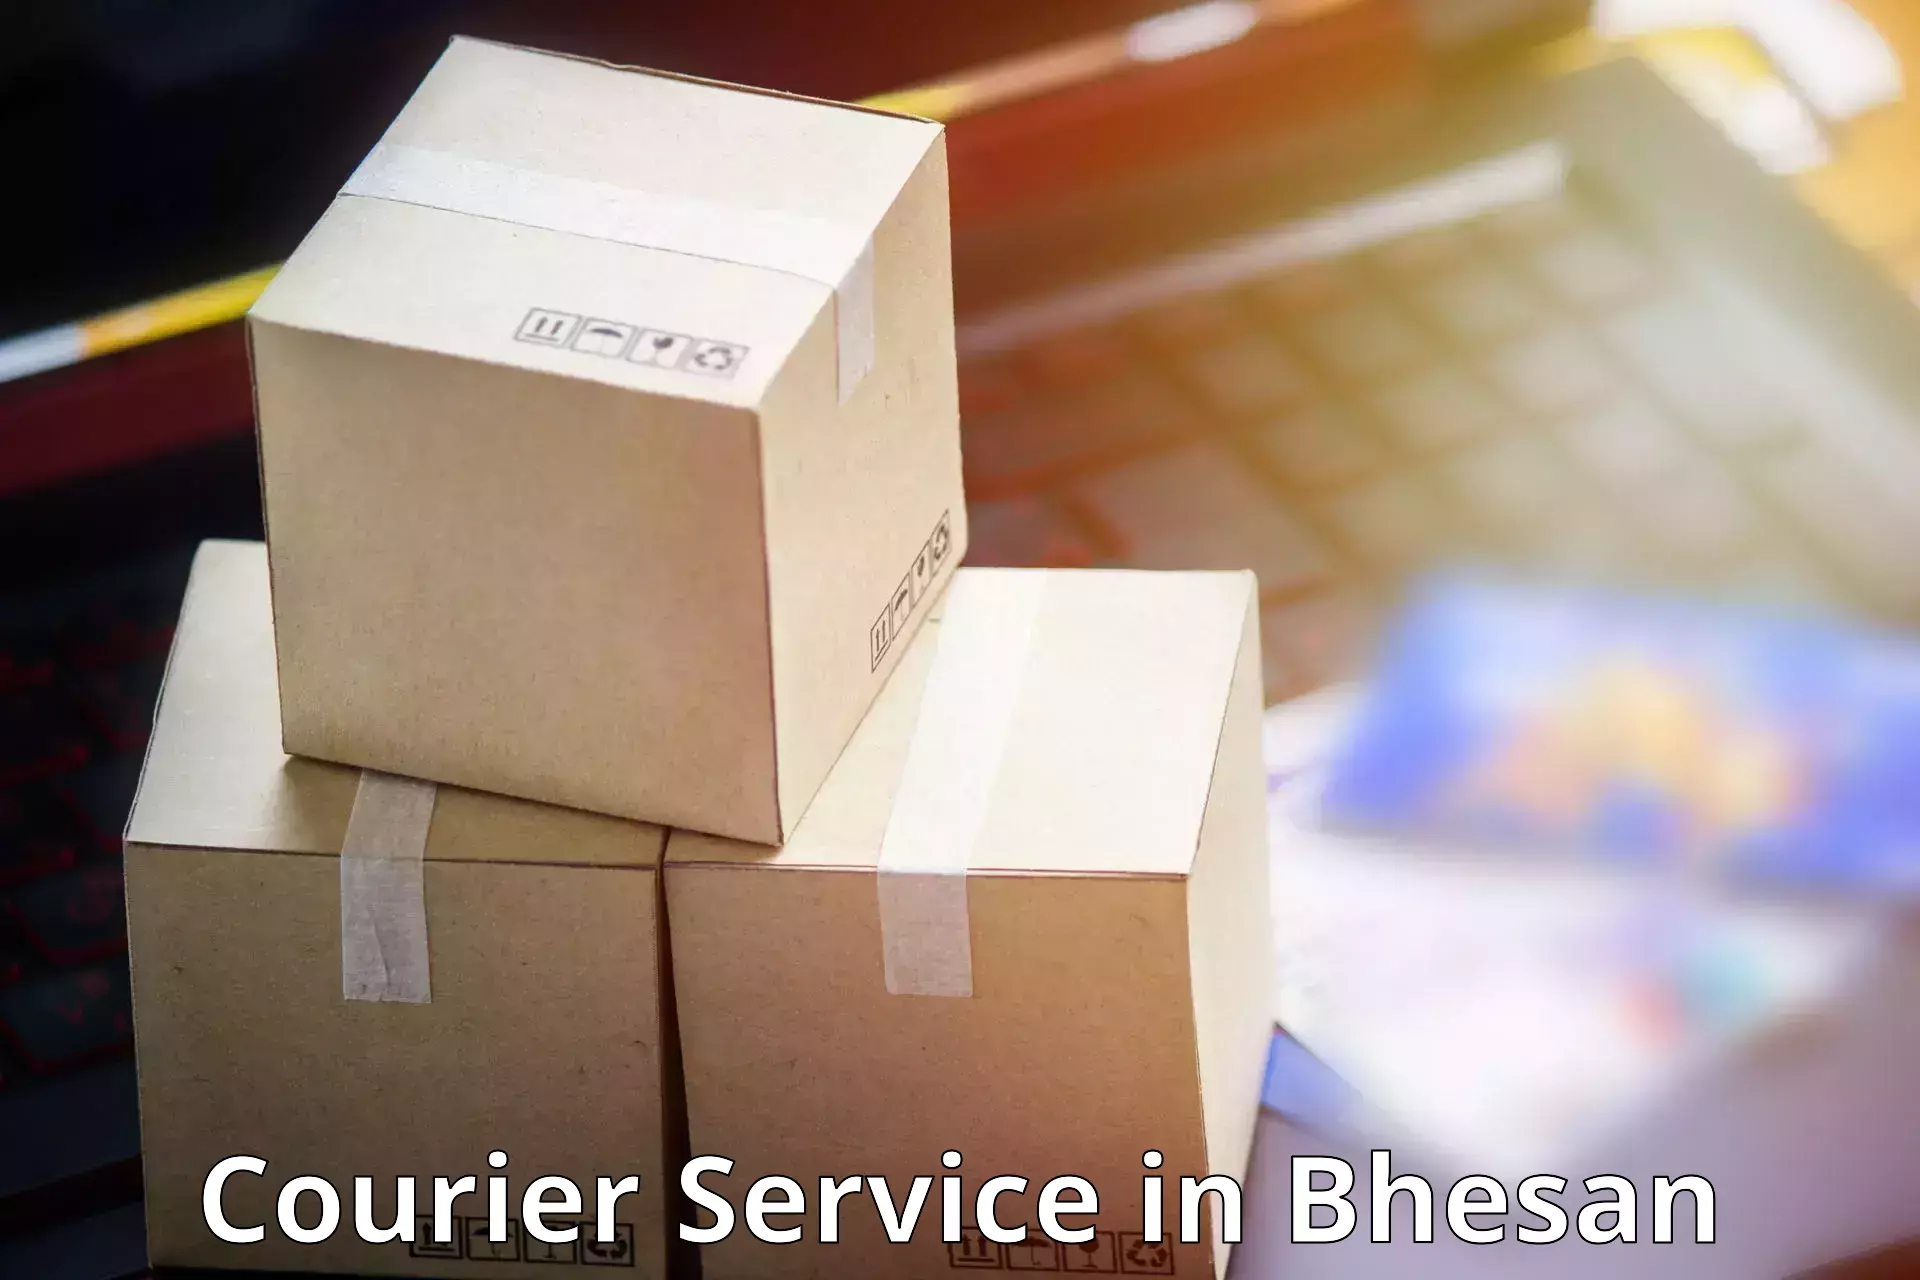 Nationwide parcel services in Bhesan